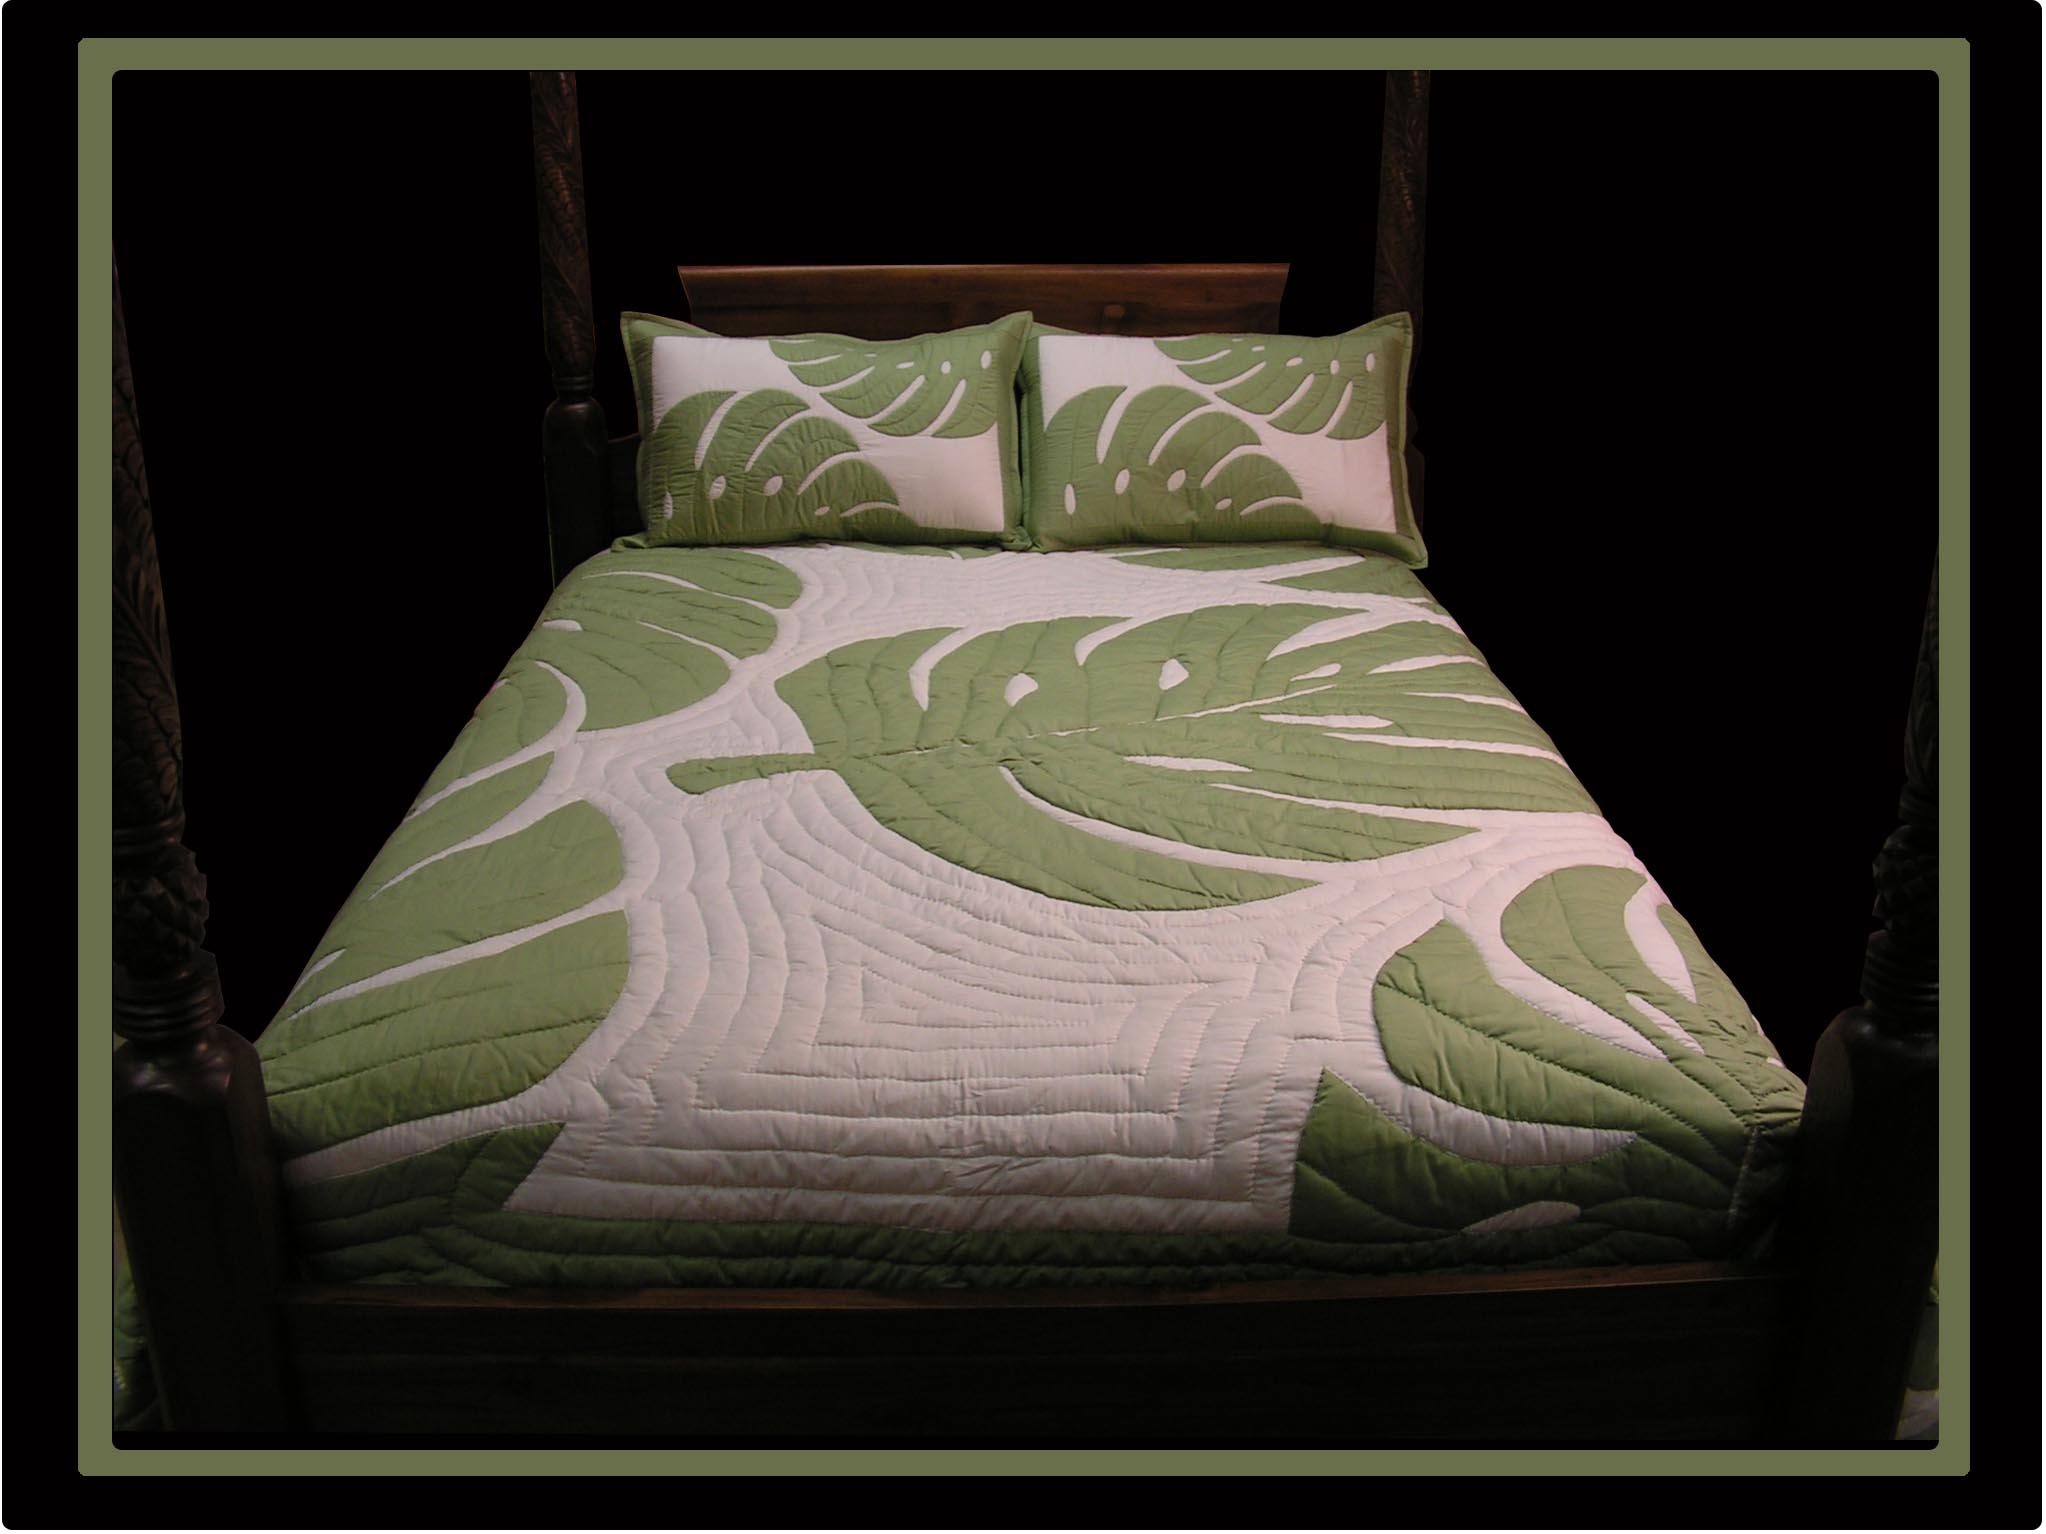 Ethnic Monochorme Pattern Print Details about   Henna Quilted Bedspread & Pillow Shams Set